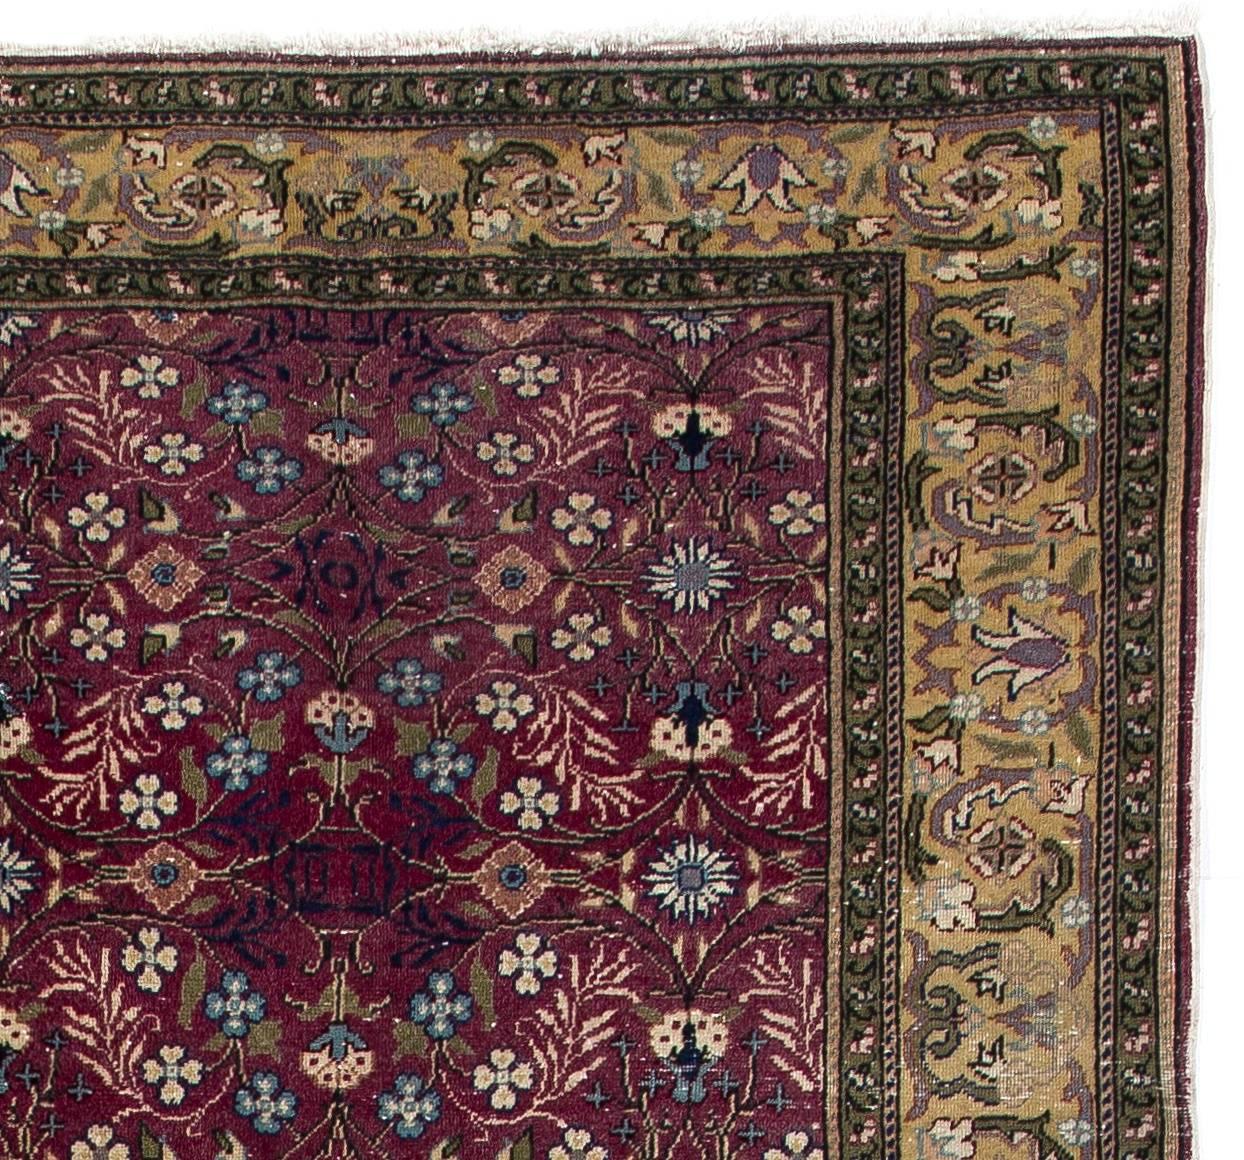 A finely hand-knotted vintage Central Anatolian rug with a Classic all-over design of small pattern flowers, leaves and branches on a beautiful plum field framed with a green, purple and soft yellow border.
The high quality wool pile on tight